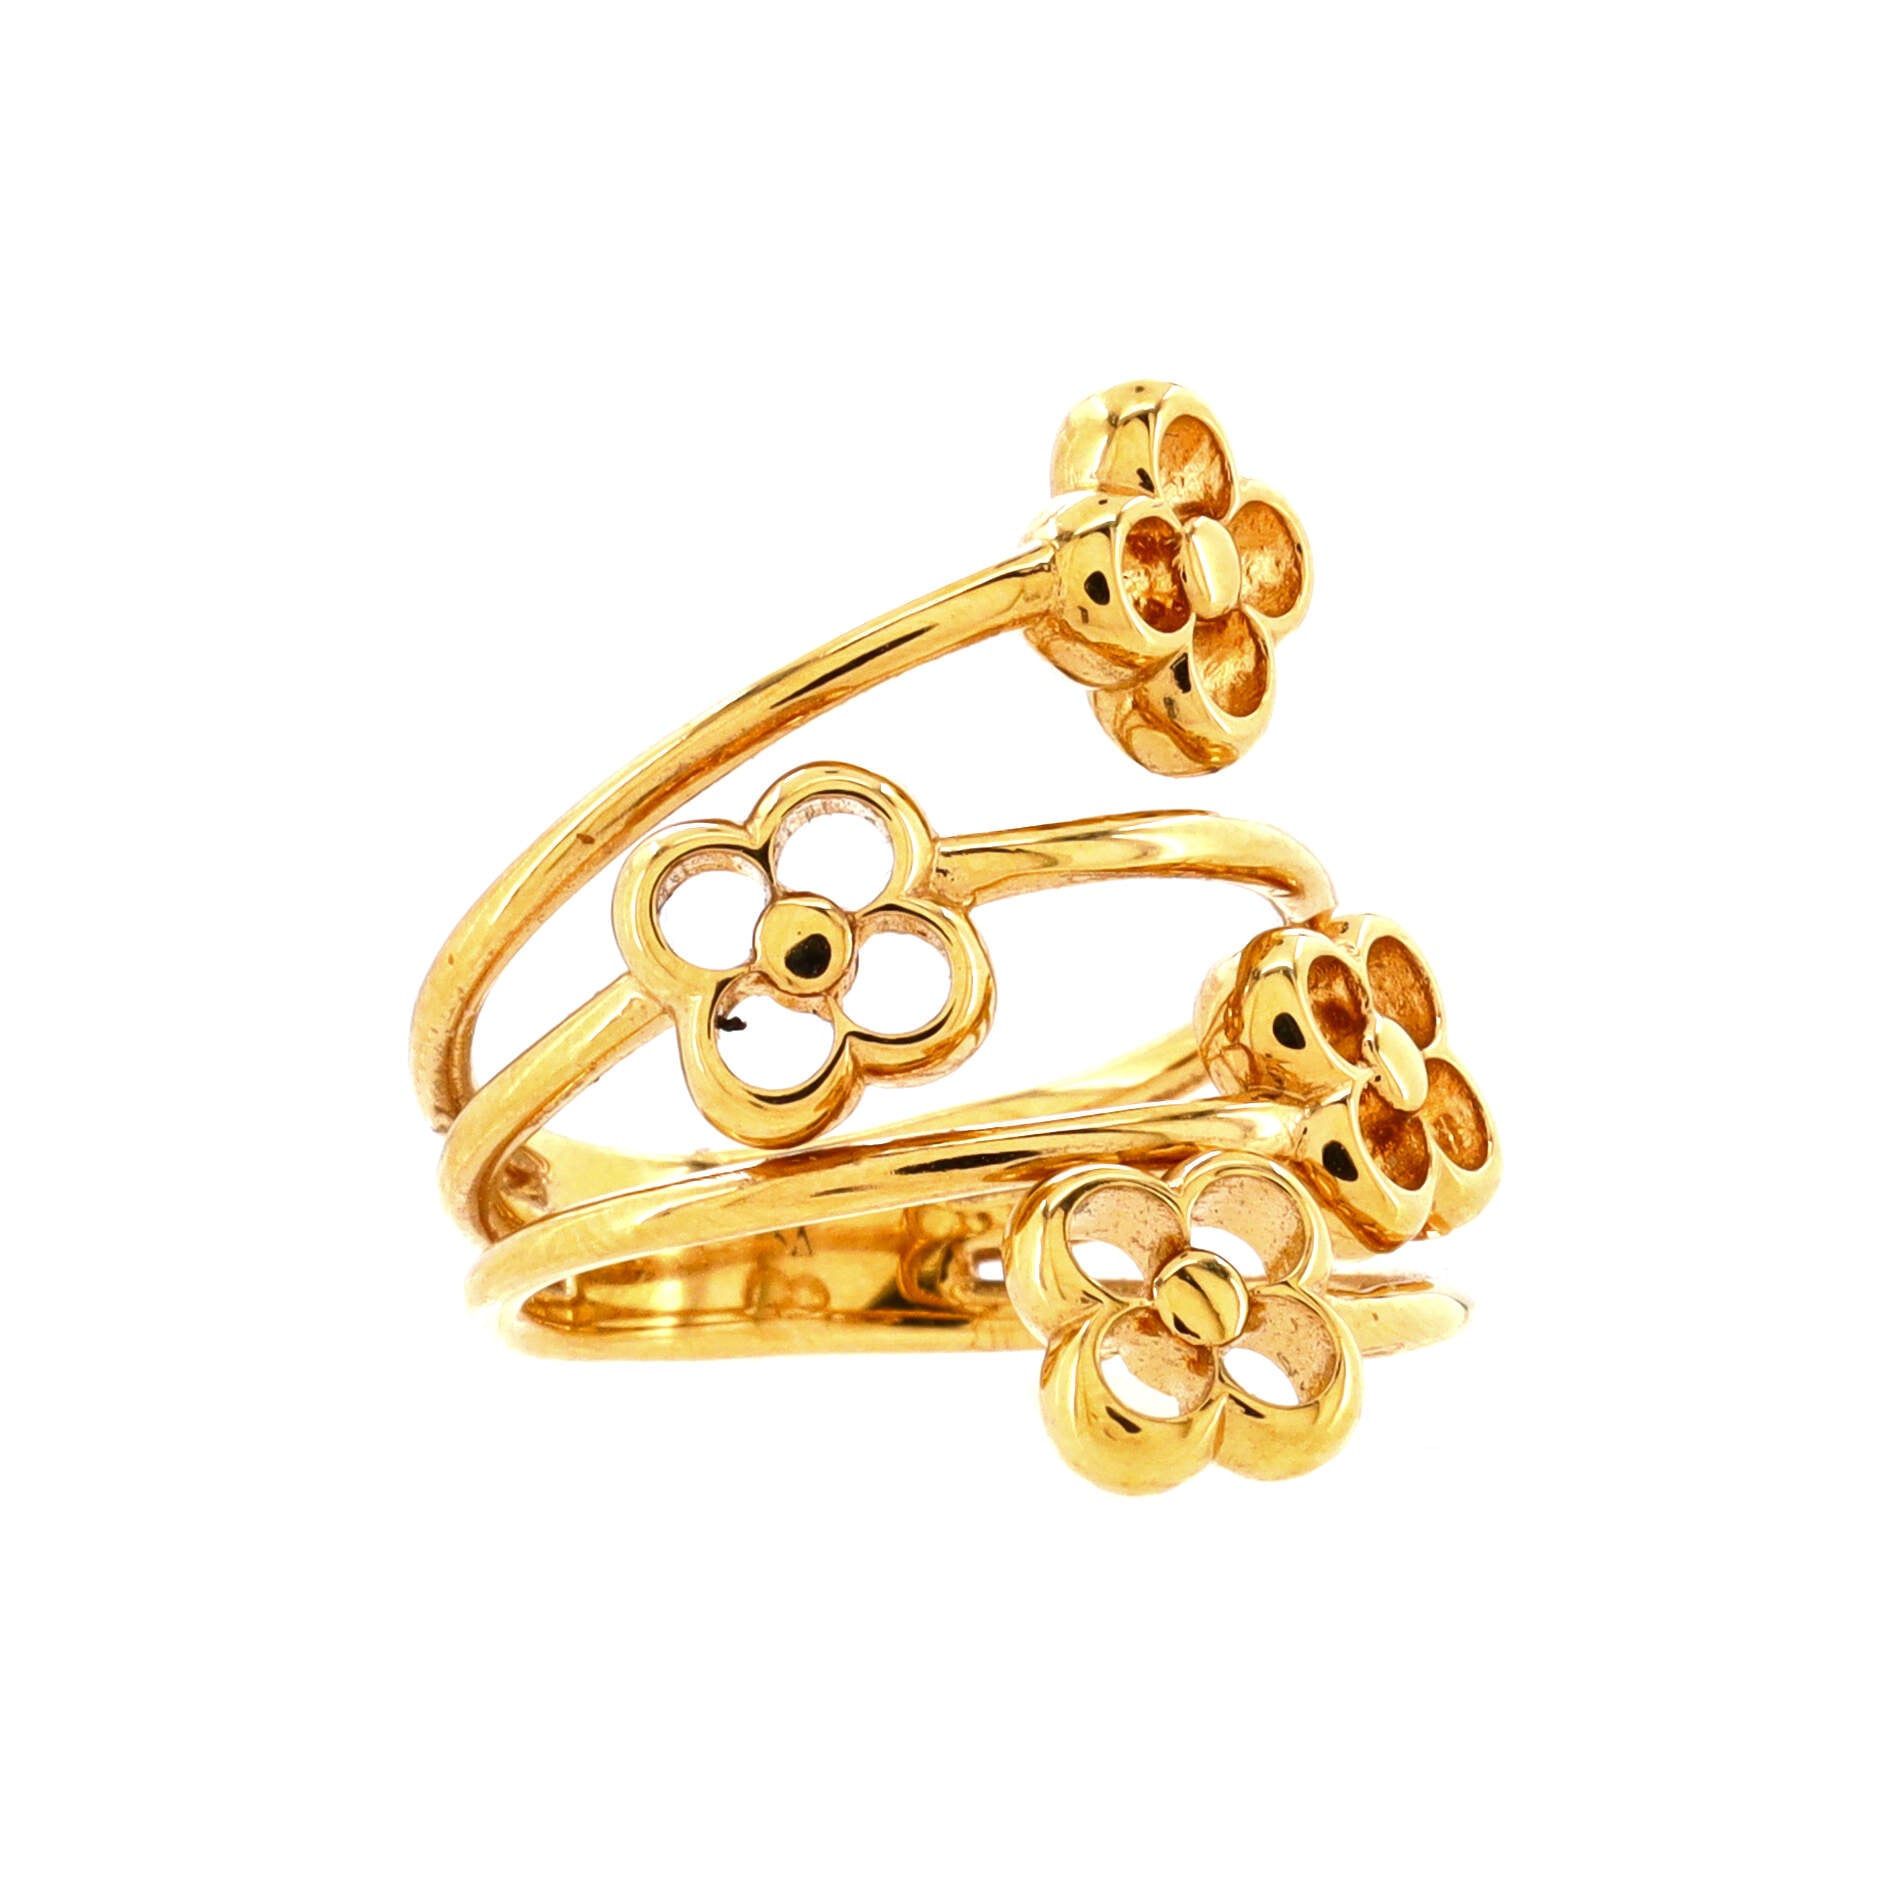 LOUIS VUITTON Flower full ring M68130｜Product Code：2100300982162